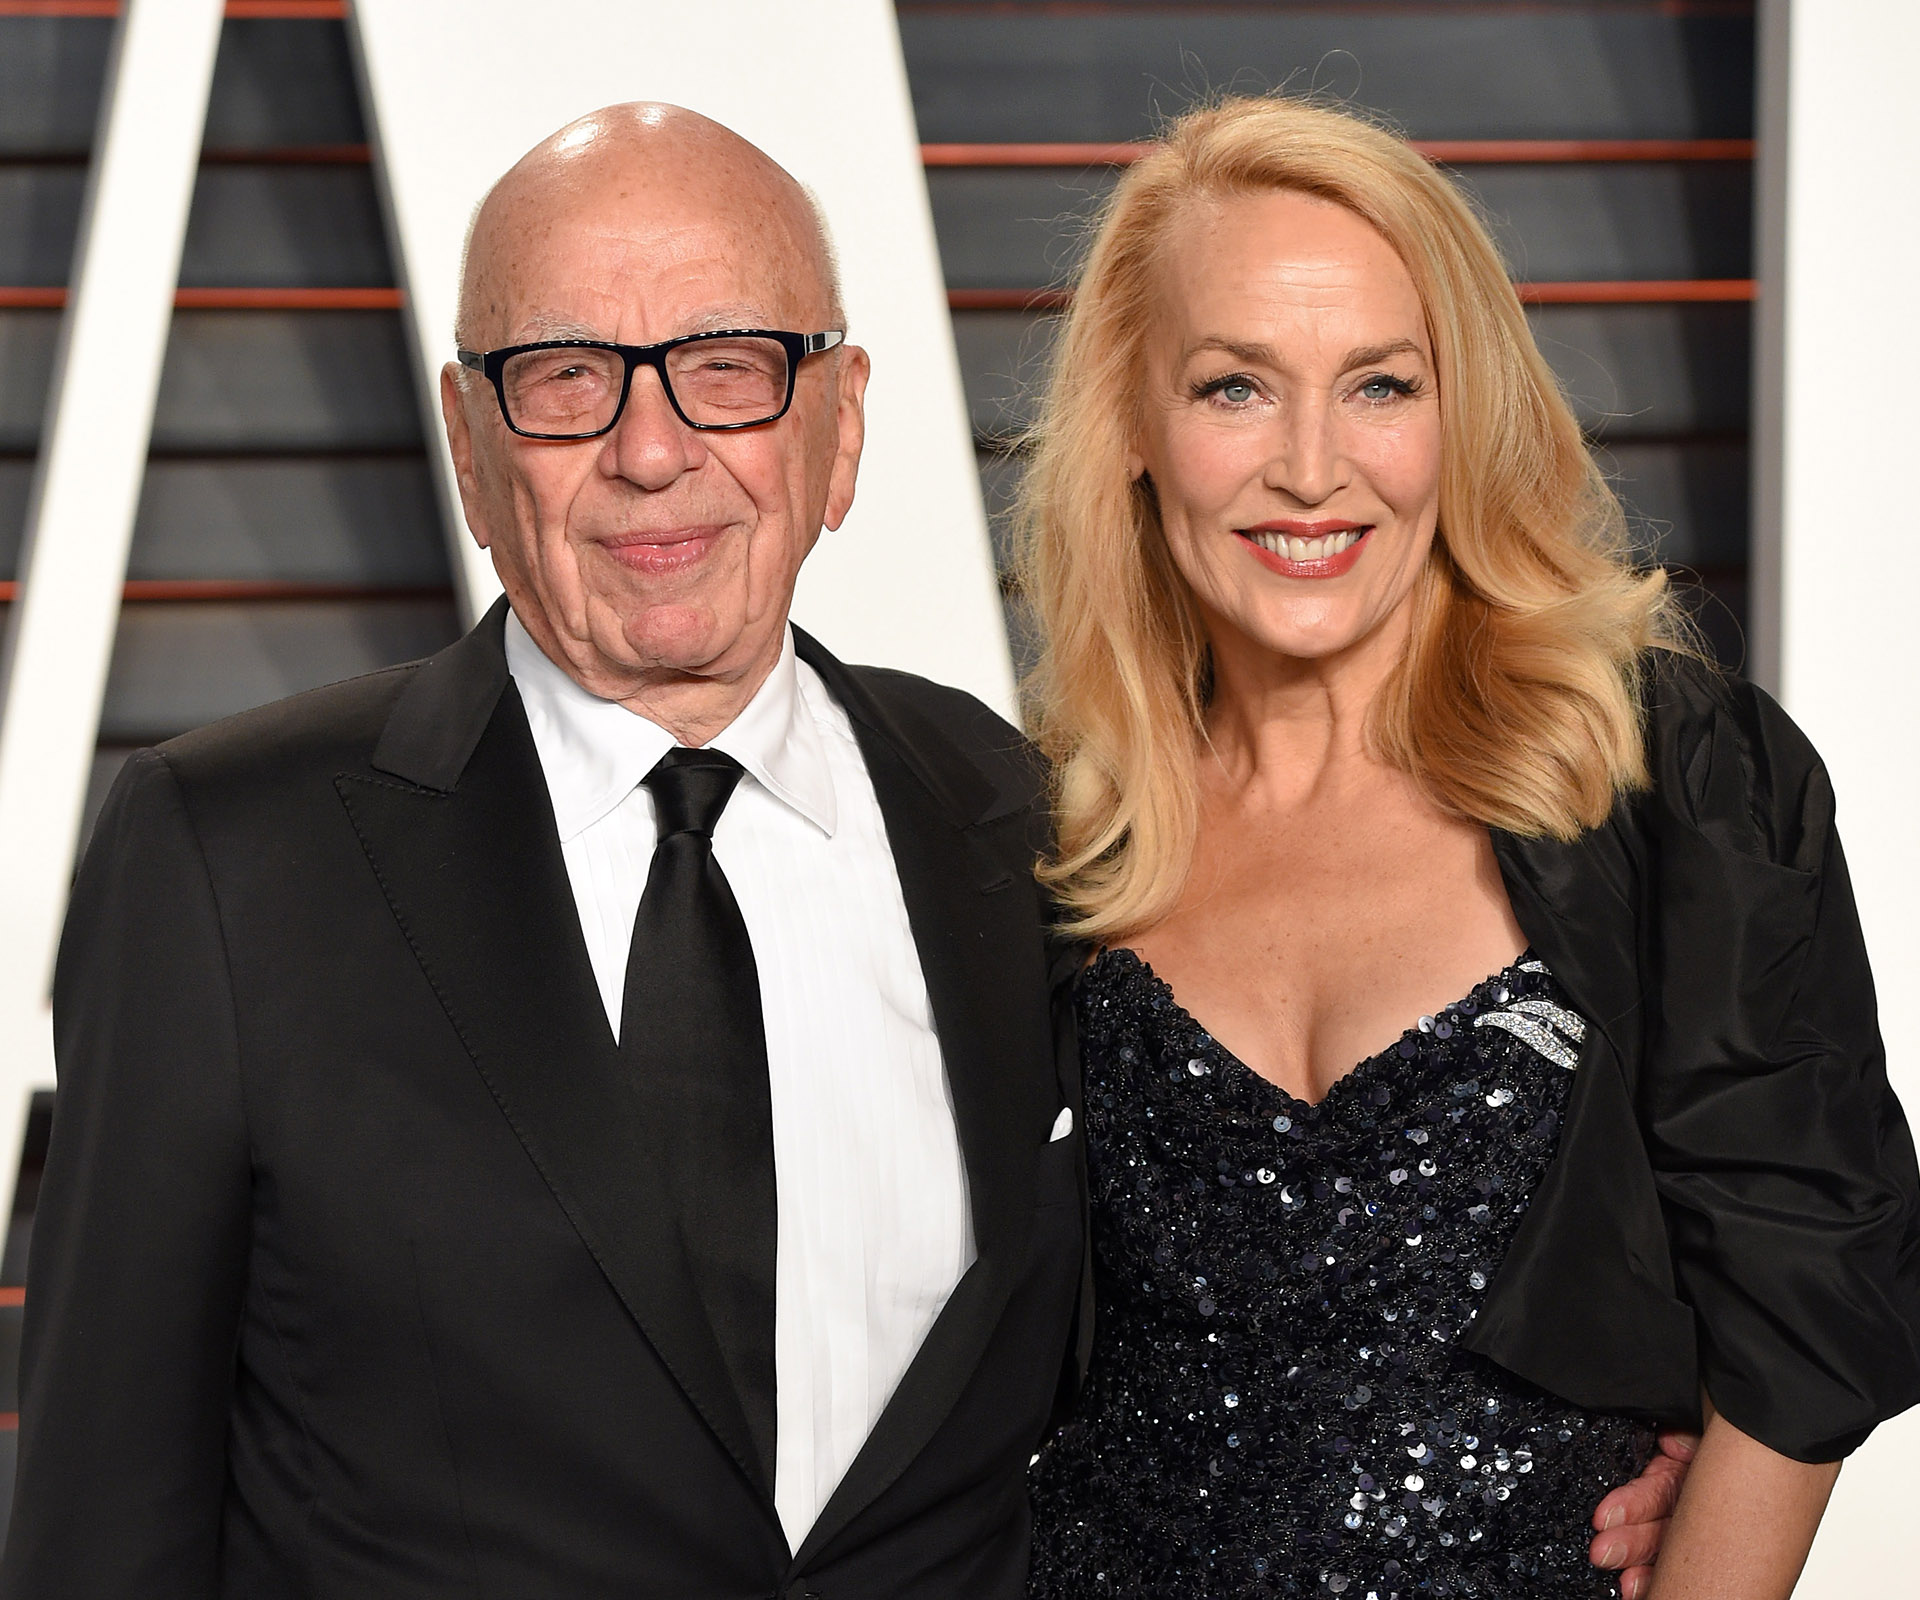 Jerry Hall and Rupert Murdoch to marry this weekend